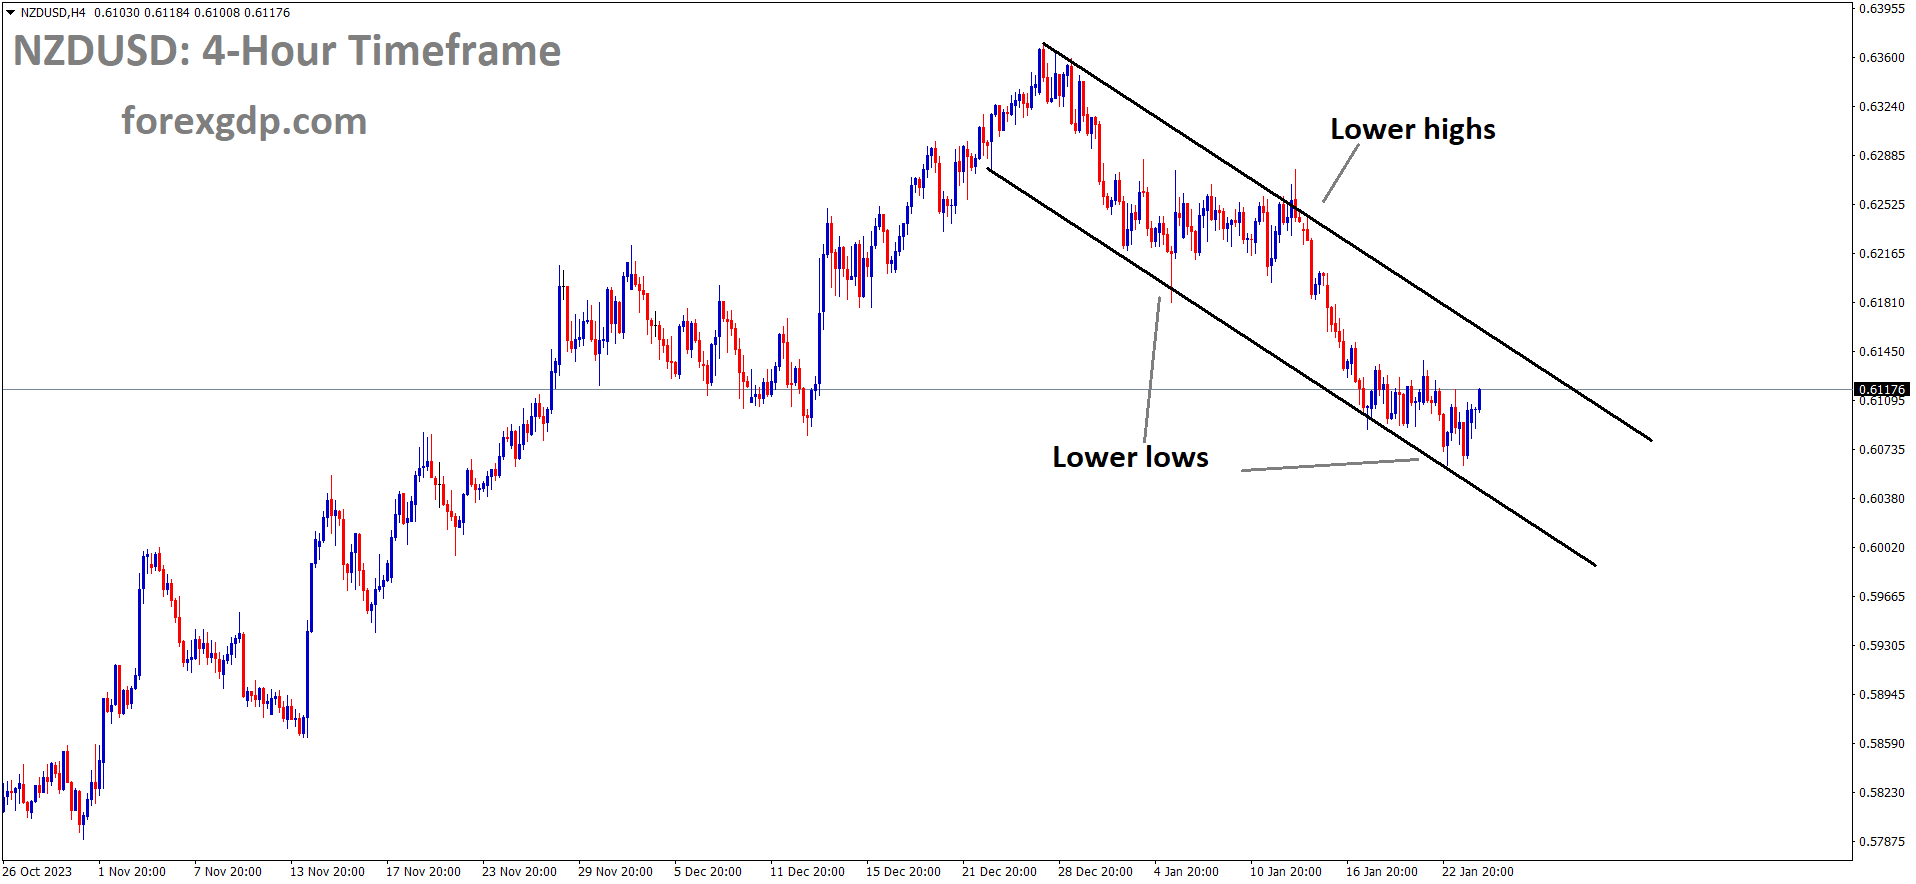 NZDUSD is moving in the Descending channel and the market has rebounded from the lower low area of the channel